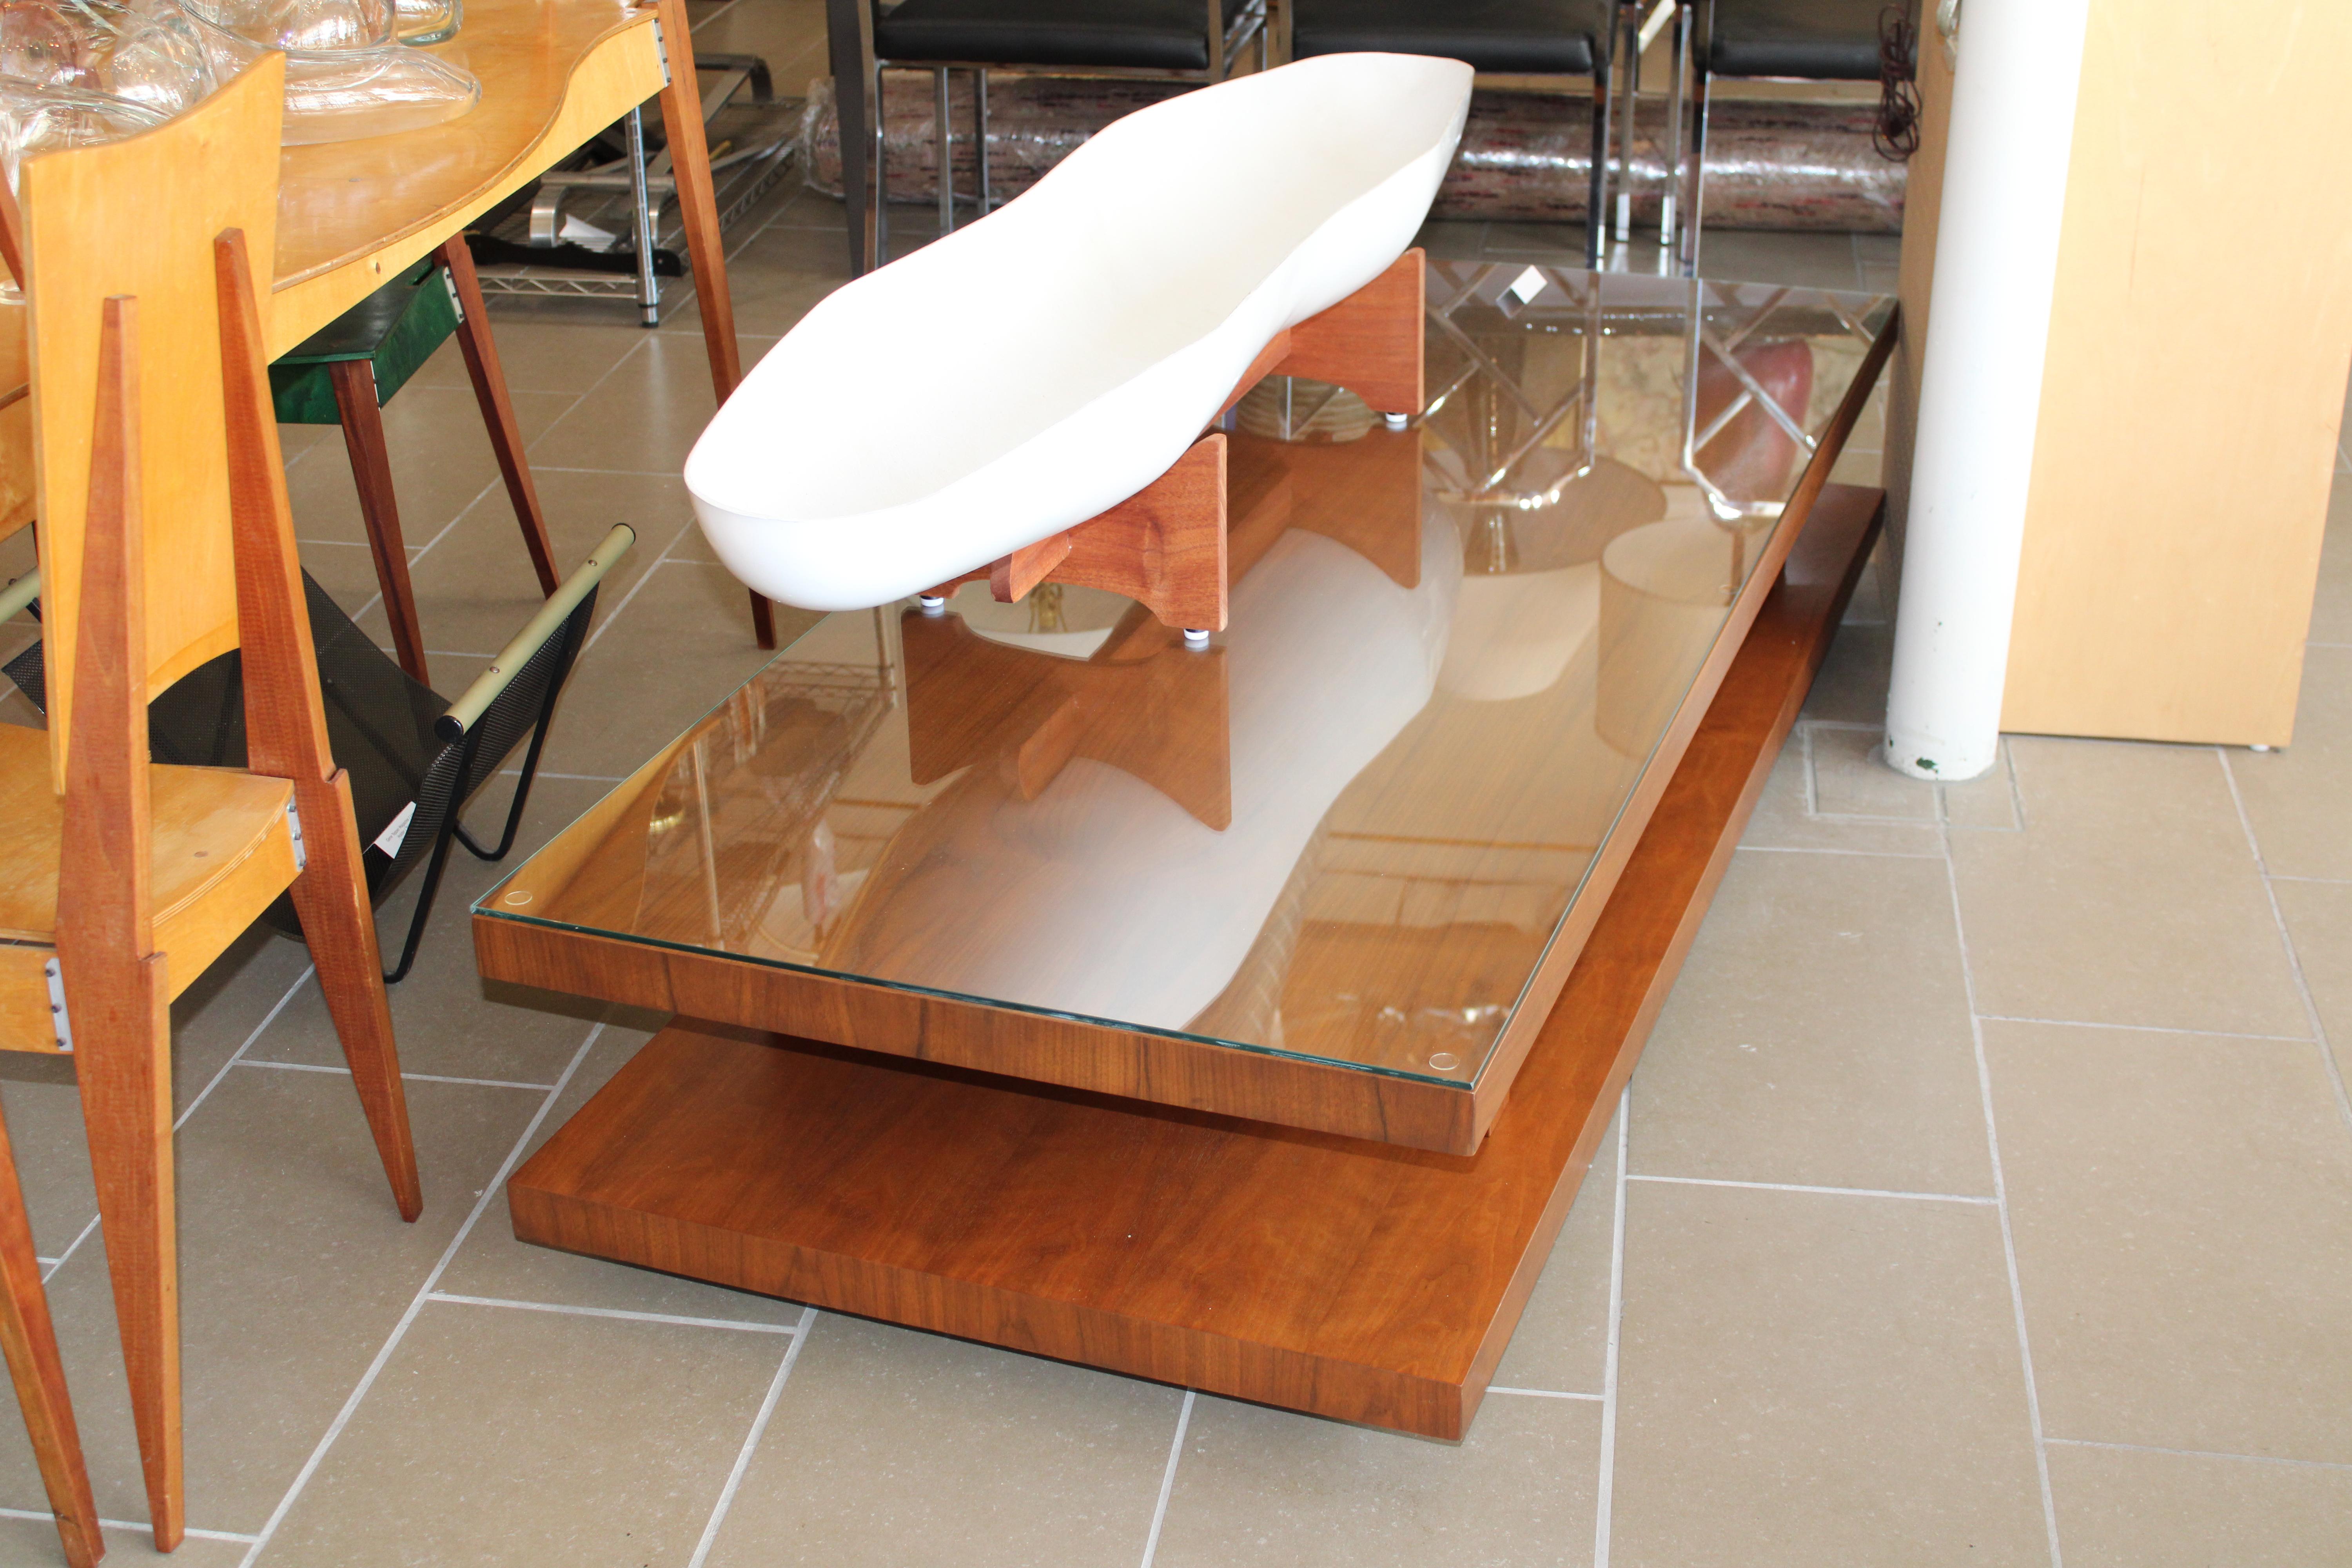 Monumental two tier coffee table on rollers in the style of Van Keppel Green (VKG). Table measures 72